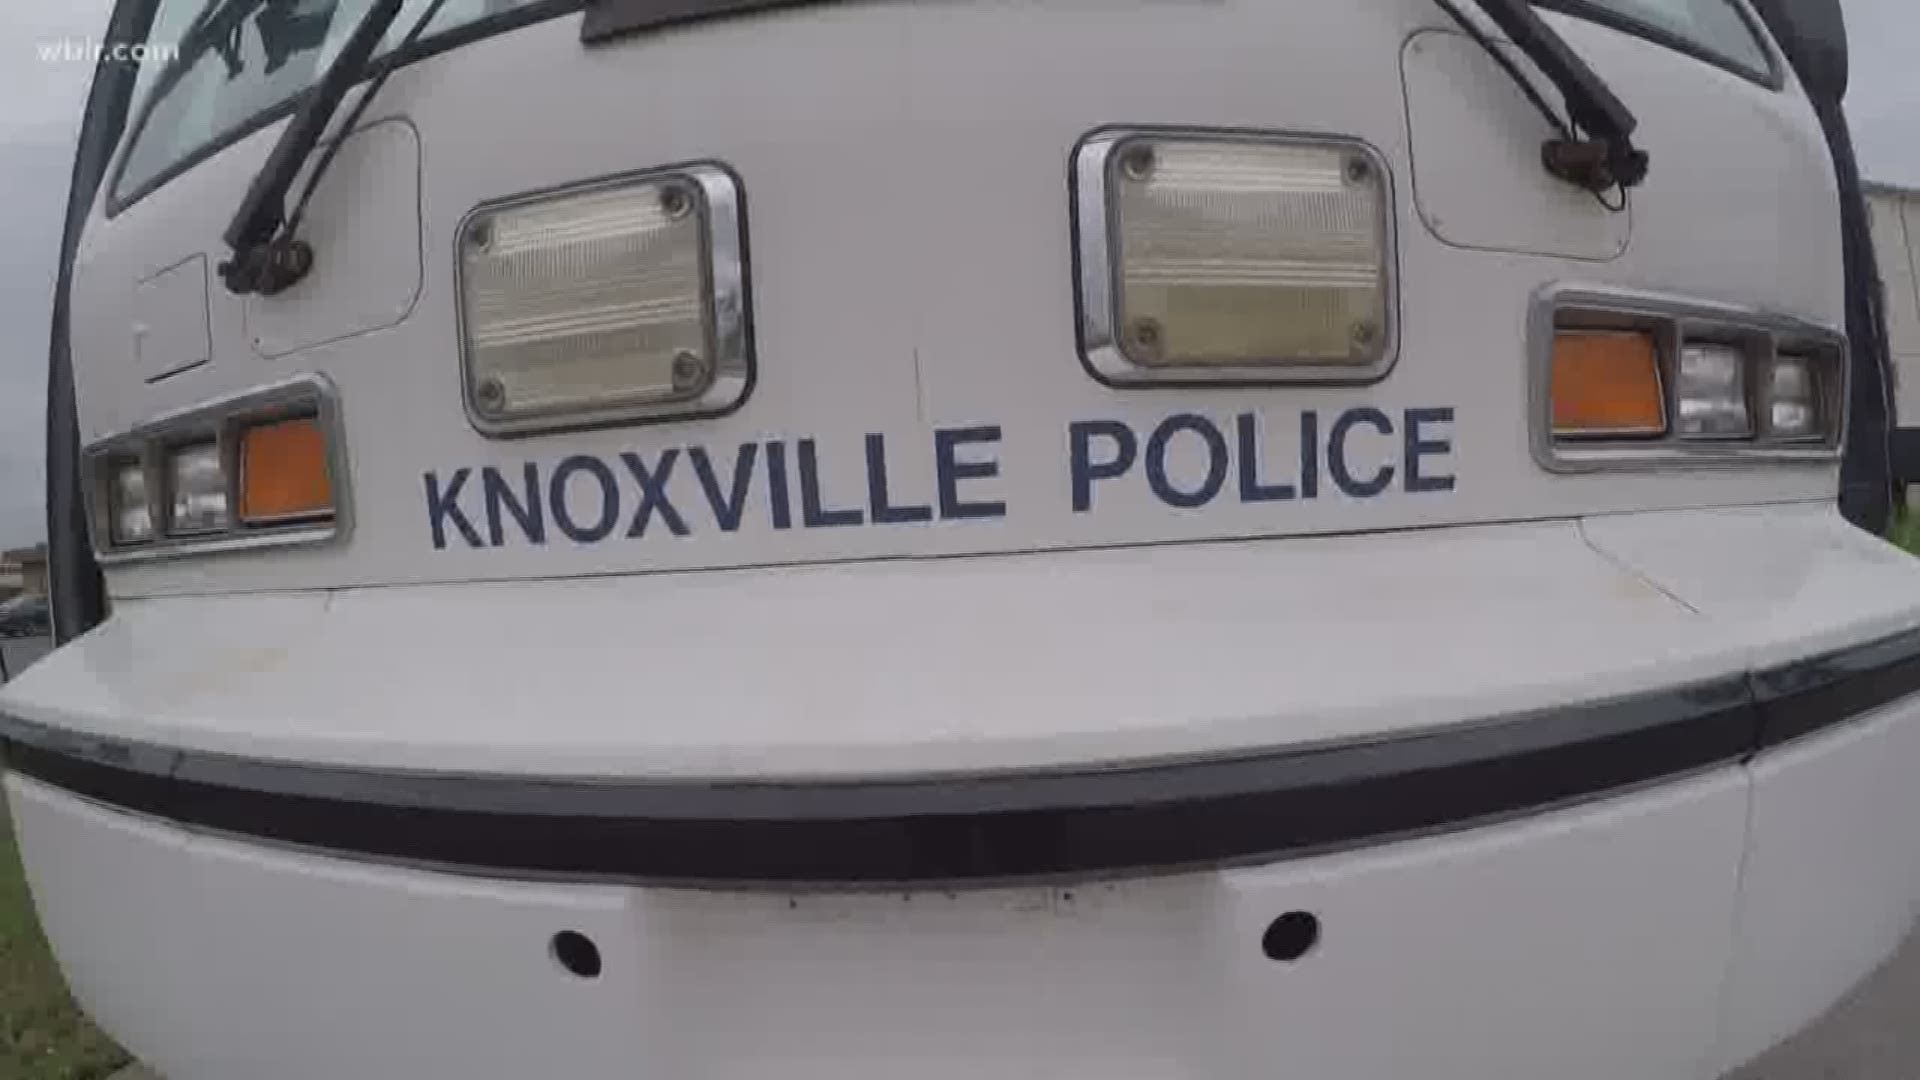 The Tennessee Highway Patrol is working to find distracted drivers with its newest bus.